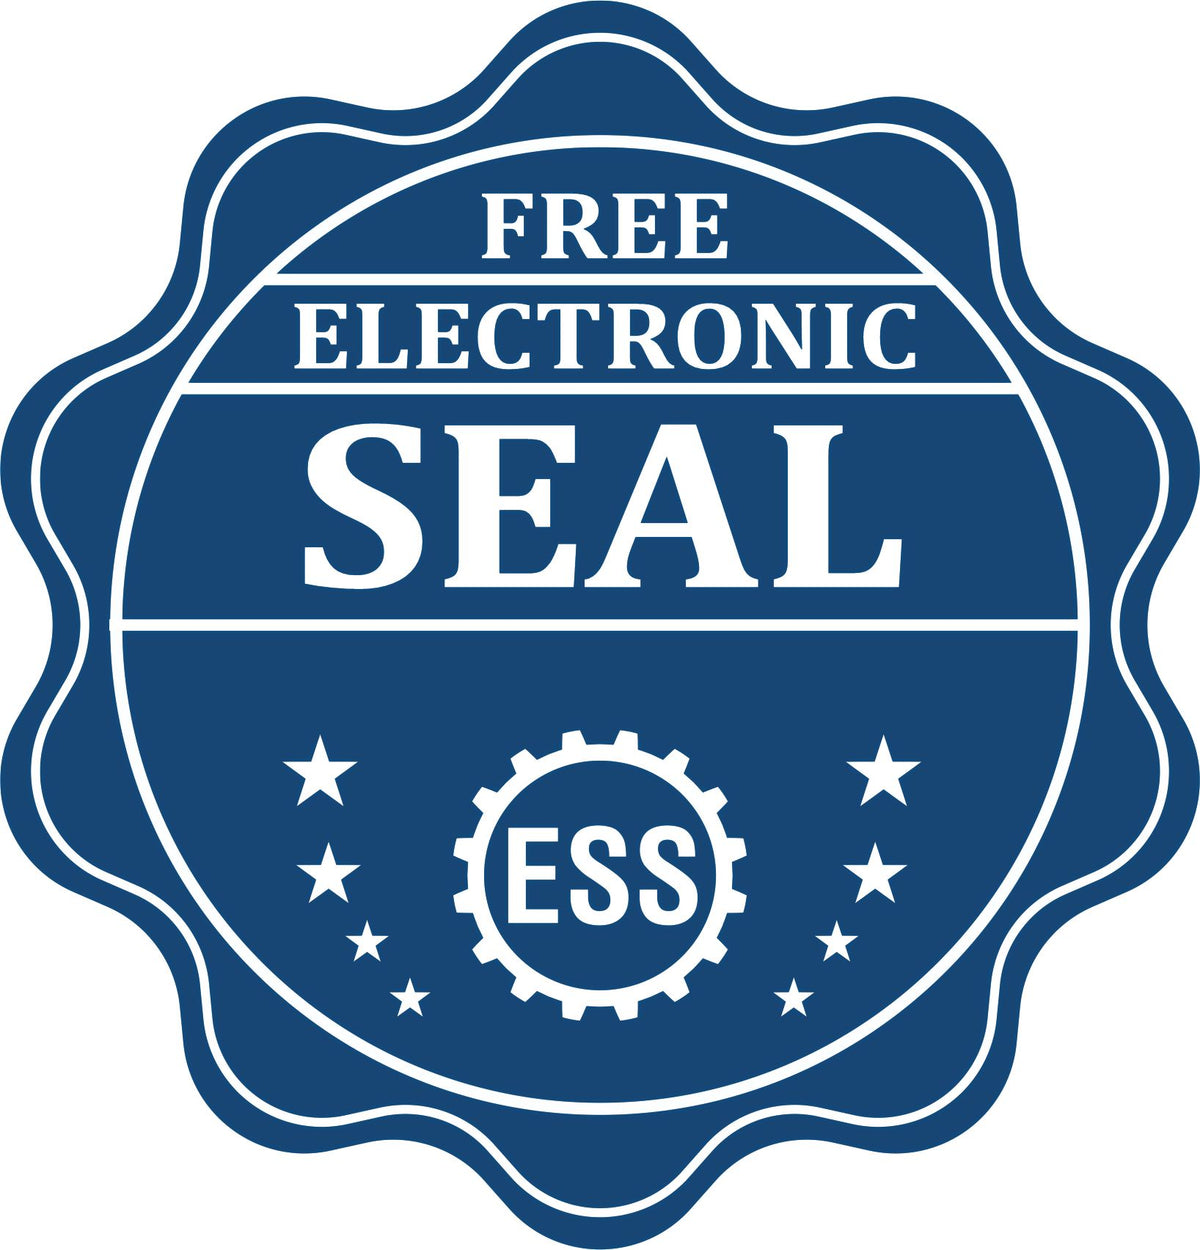 A badge showing a free electronic seal for the PSI Kentucky Notary Stamp with stars and the ESS gear on the emblem.